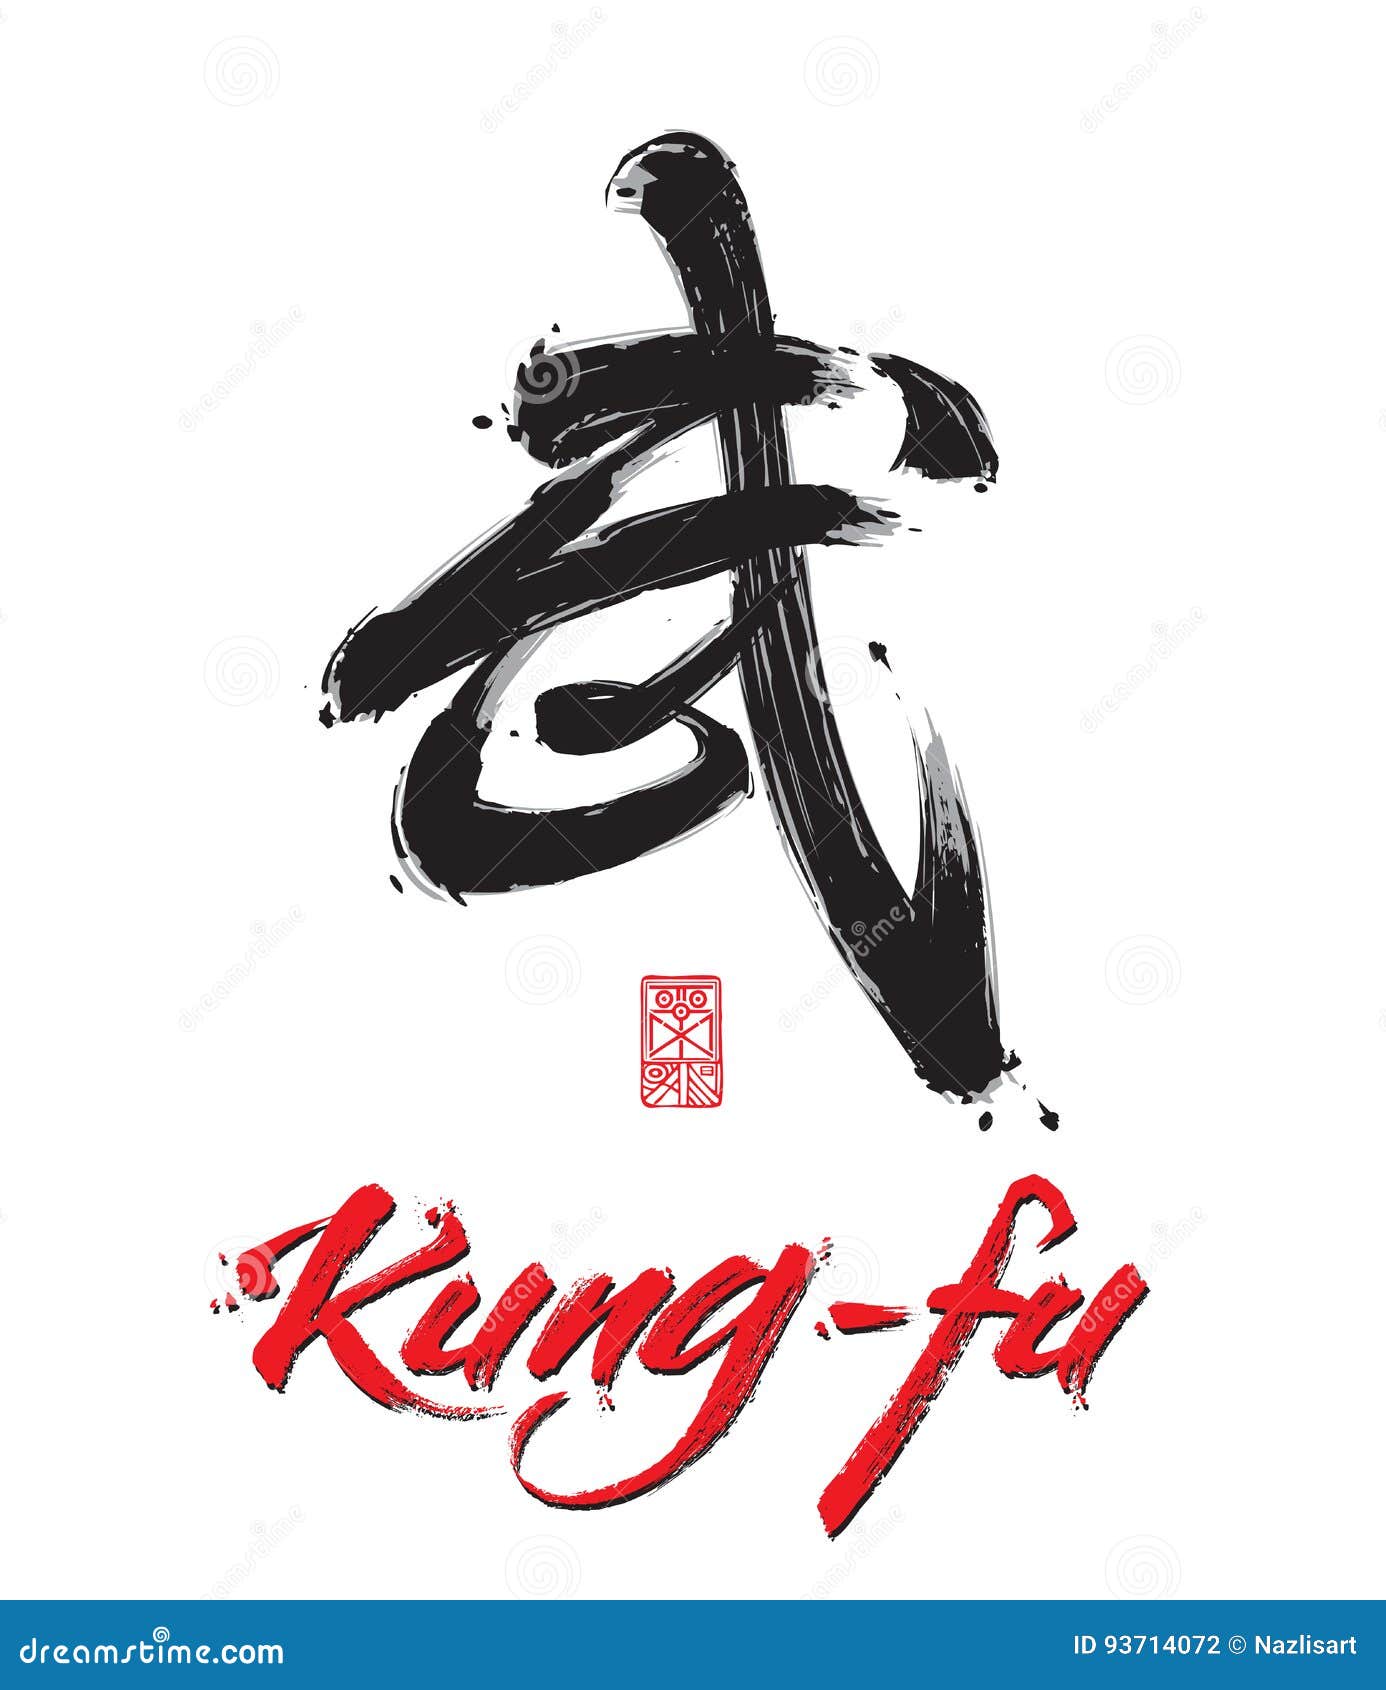 Red Kung Fu Lettering and Chinese Calligraphic Sumbol Stock Vector